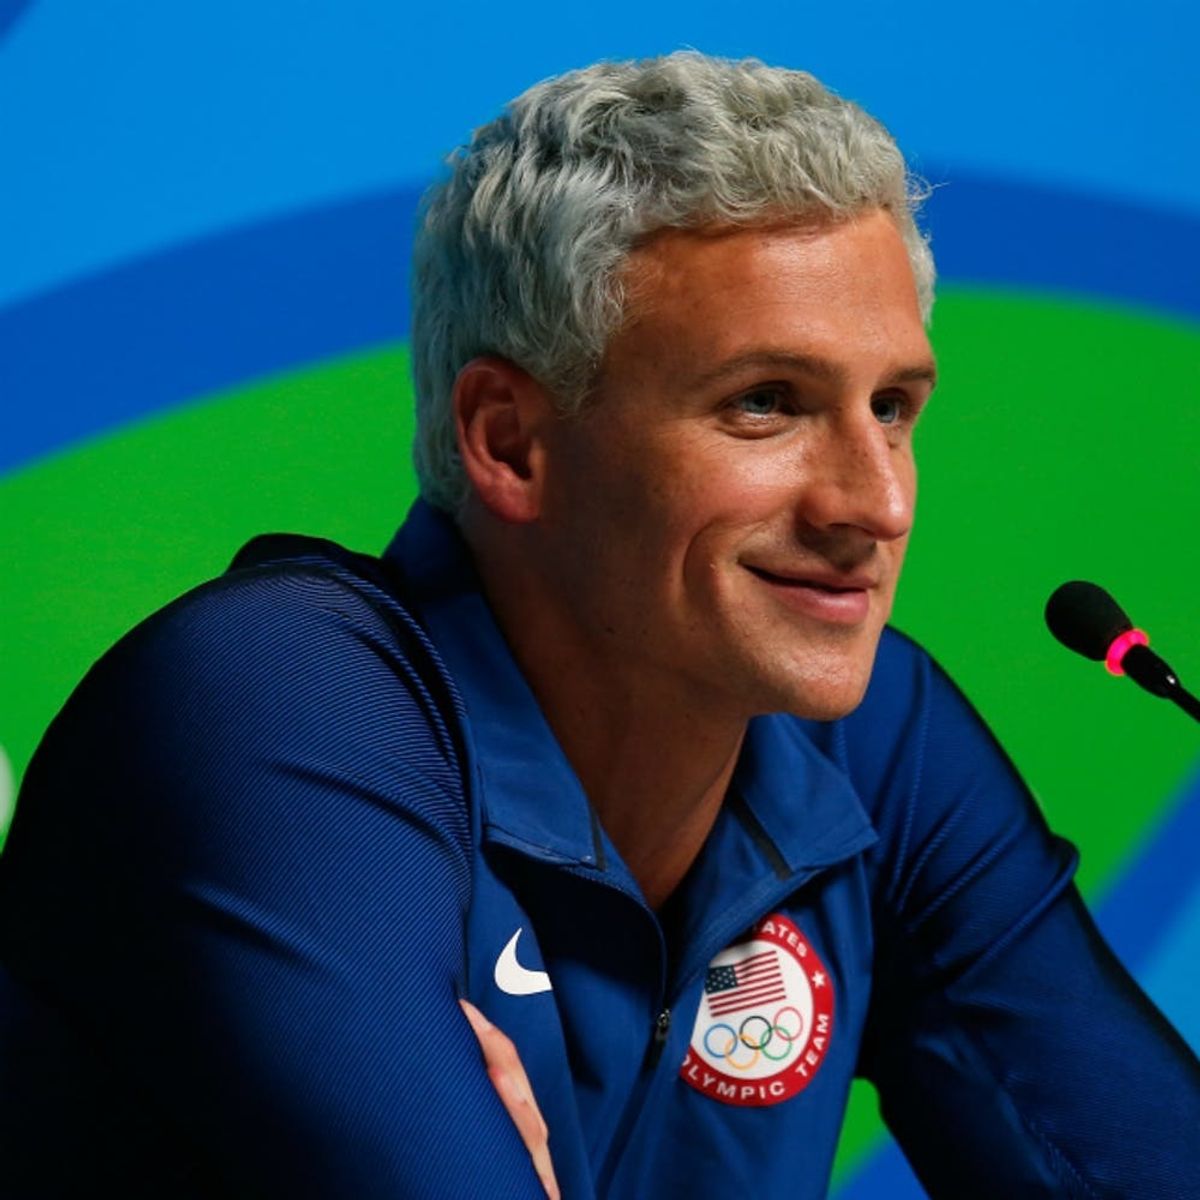 Ryan Lochte Keeps Getting Punished for His Rio Fiasco